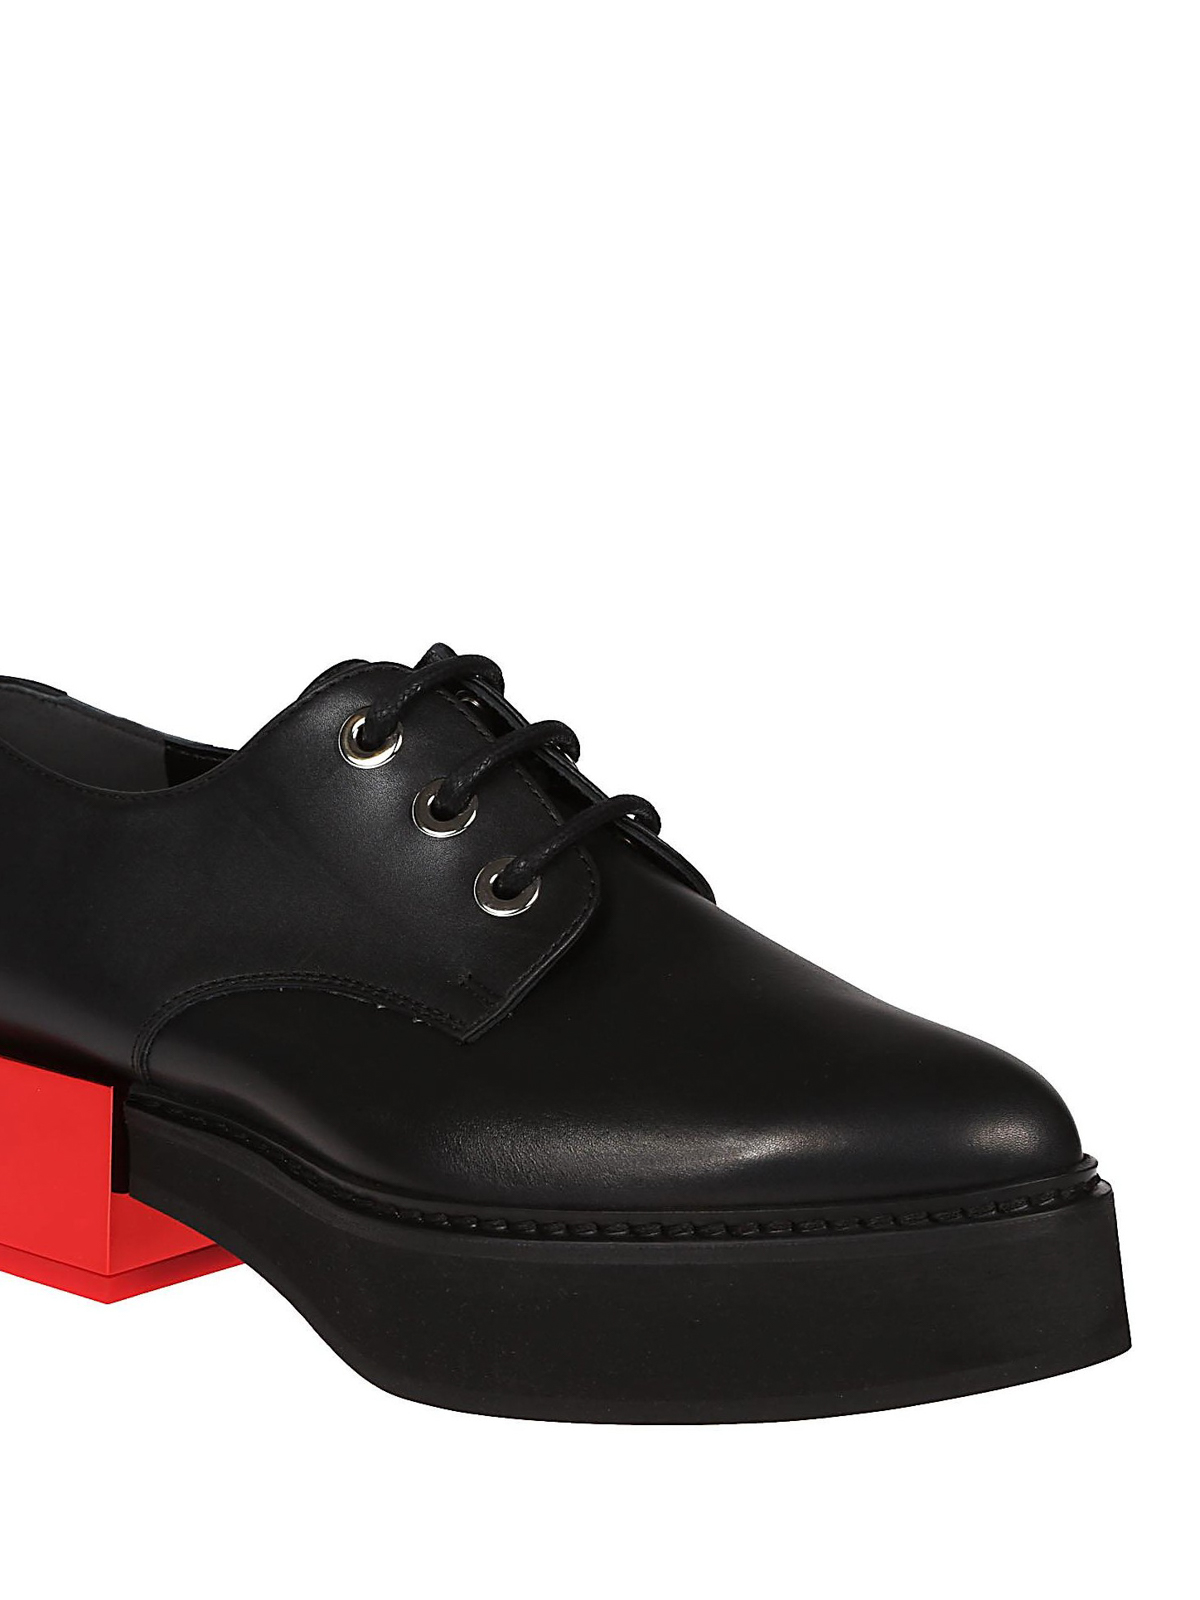 Lace-ups shoes Alexander Mcqueen - Red heel lace-up leather